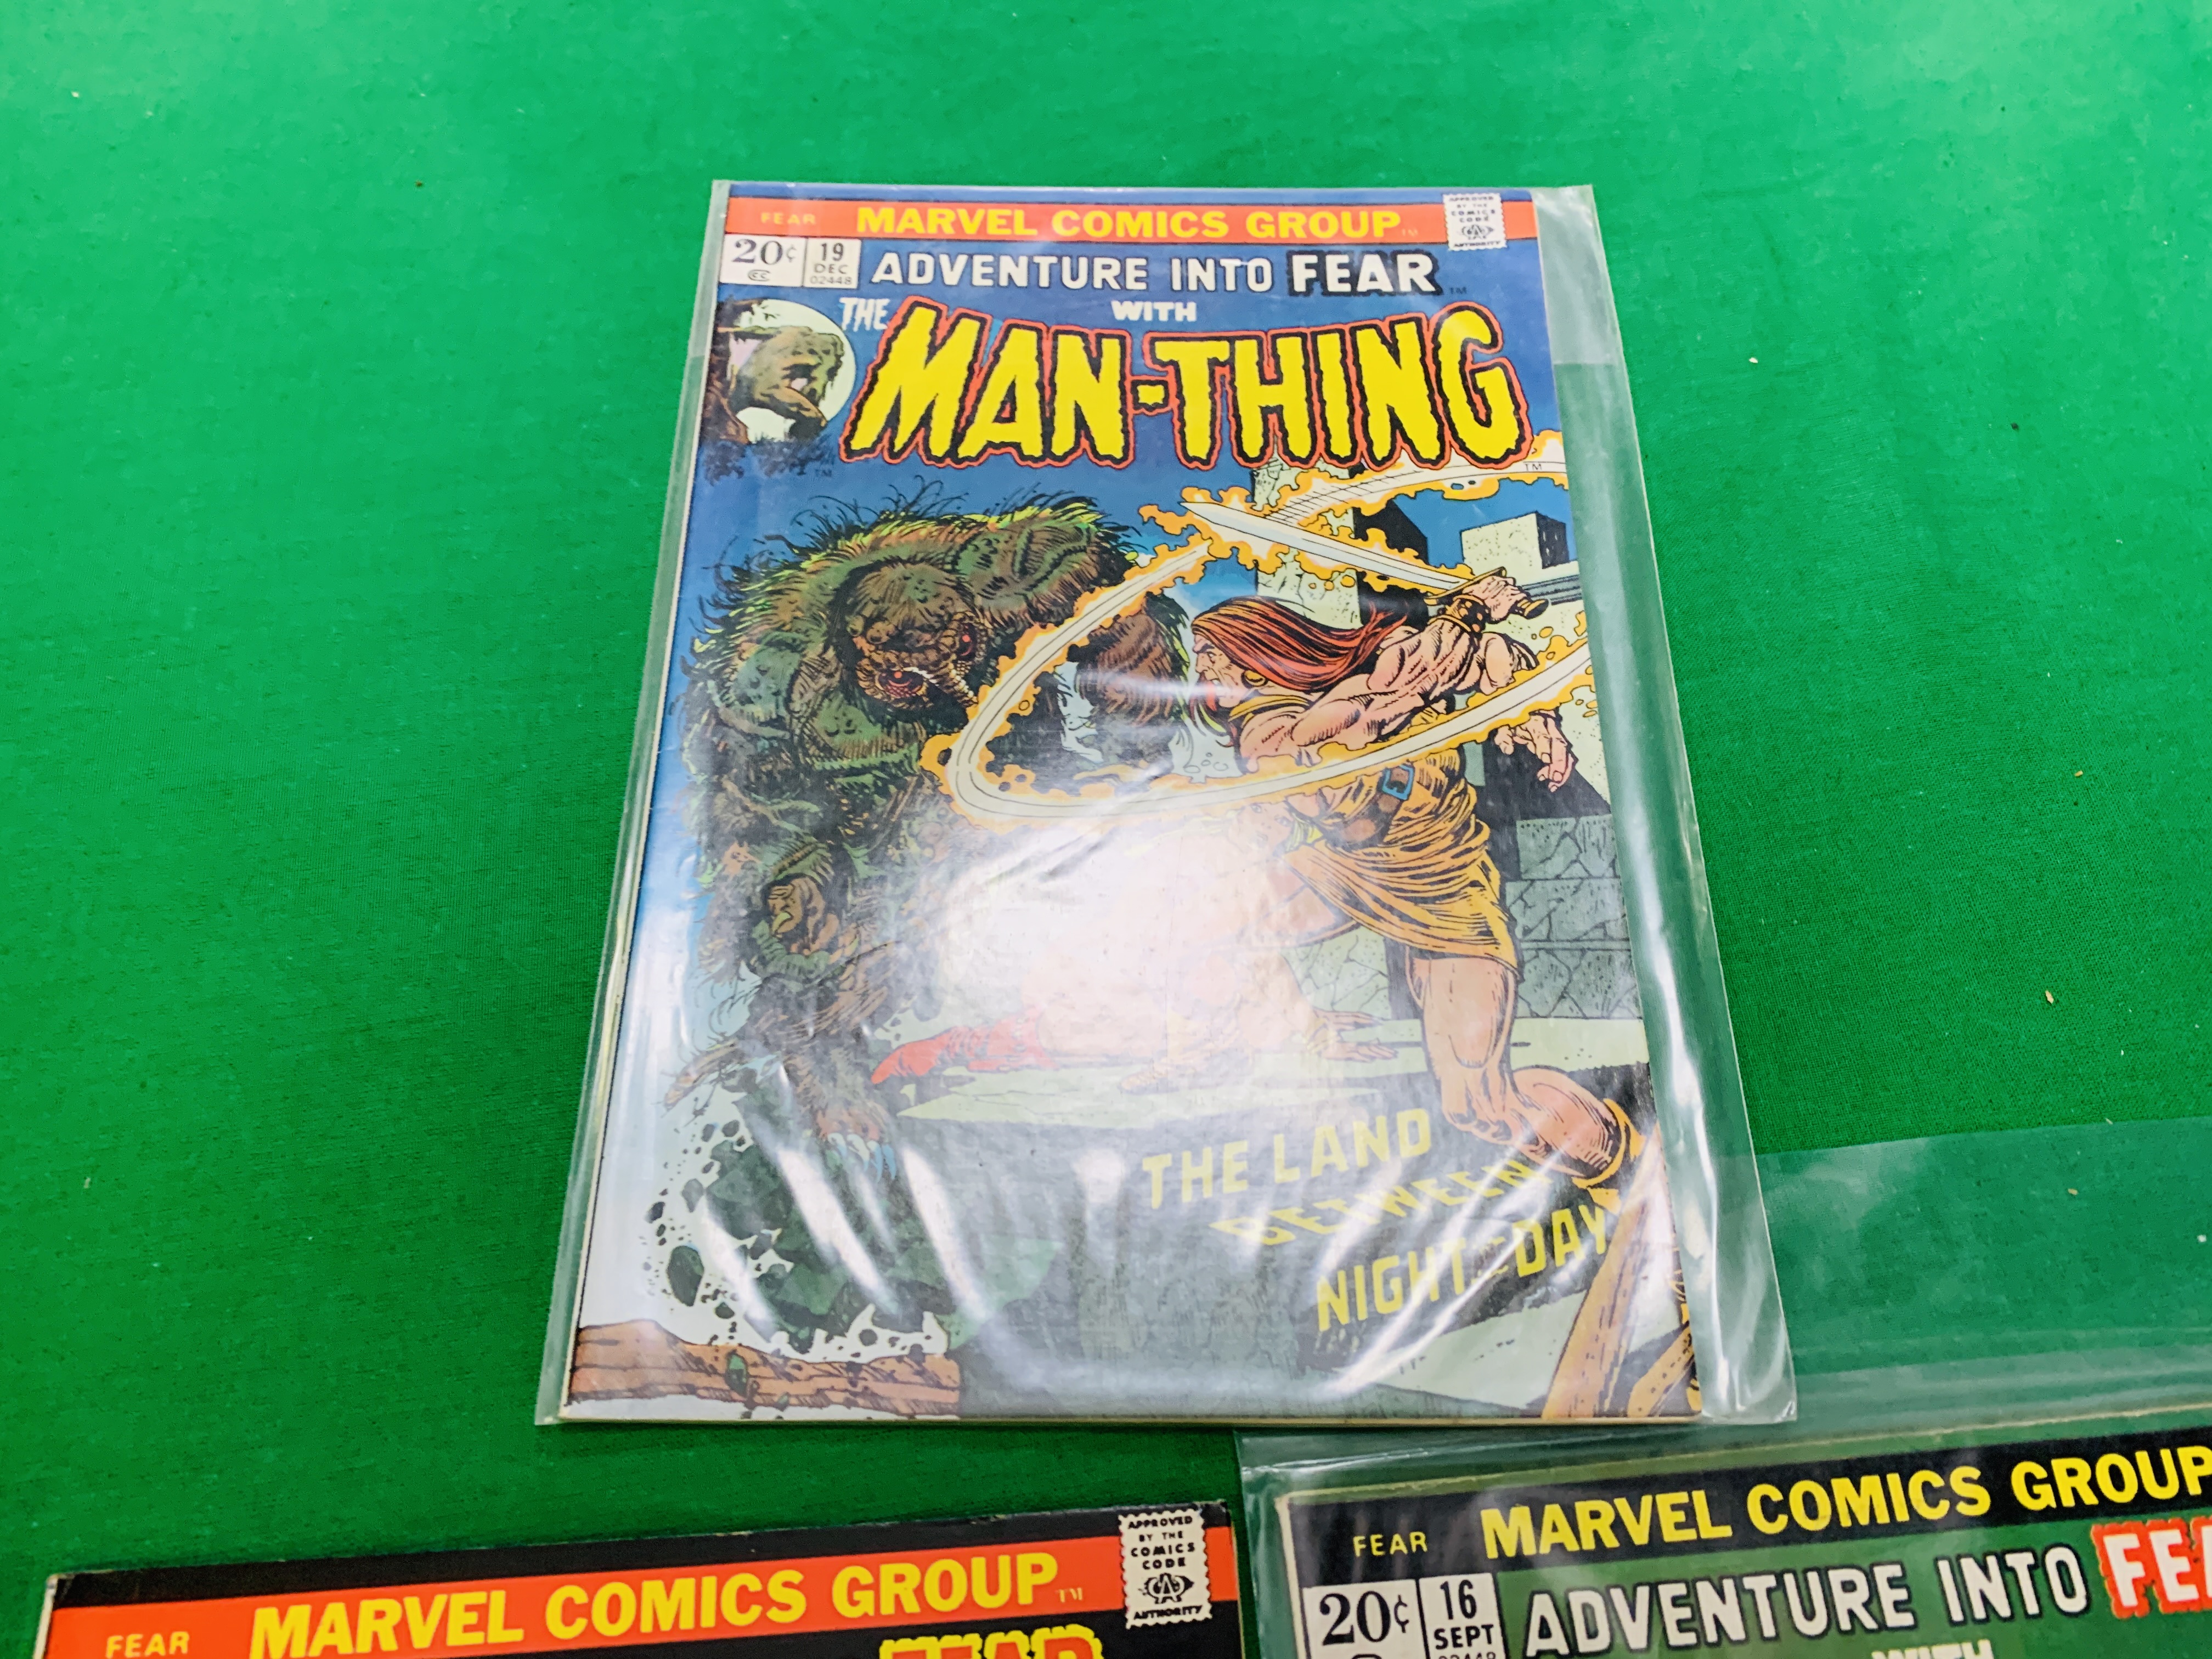 MARVEL COMICS ADVENTURE INTO FEAR WITH MAN-THING NO. 10 - 17, 19, FROM 1973. NO 19. - Image 6 of 6